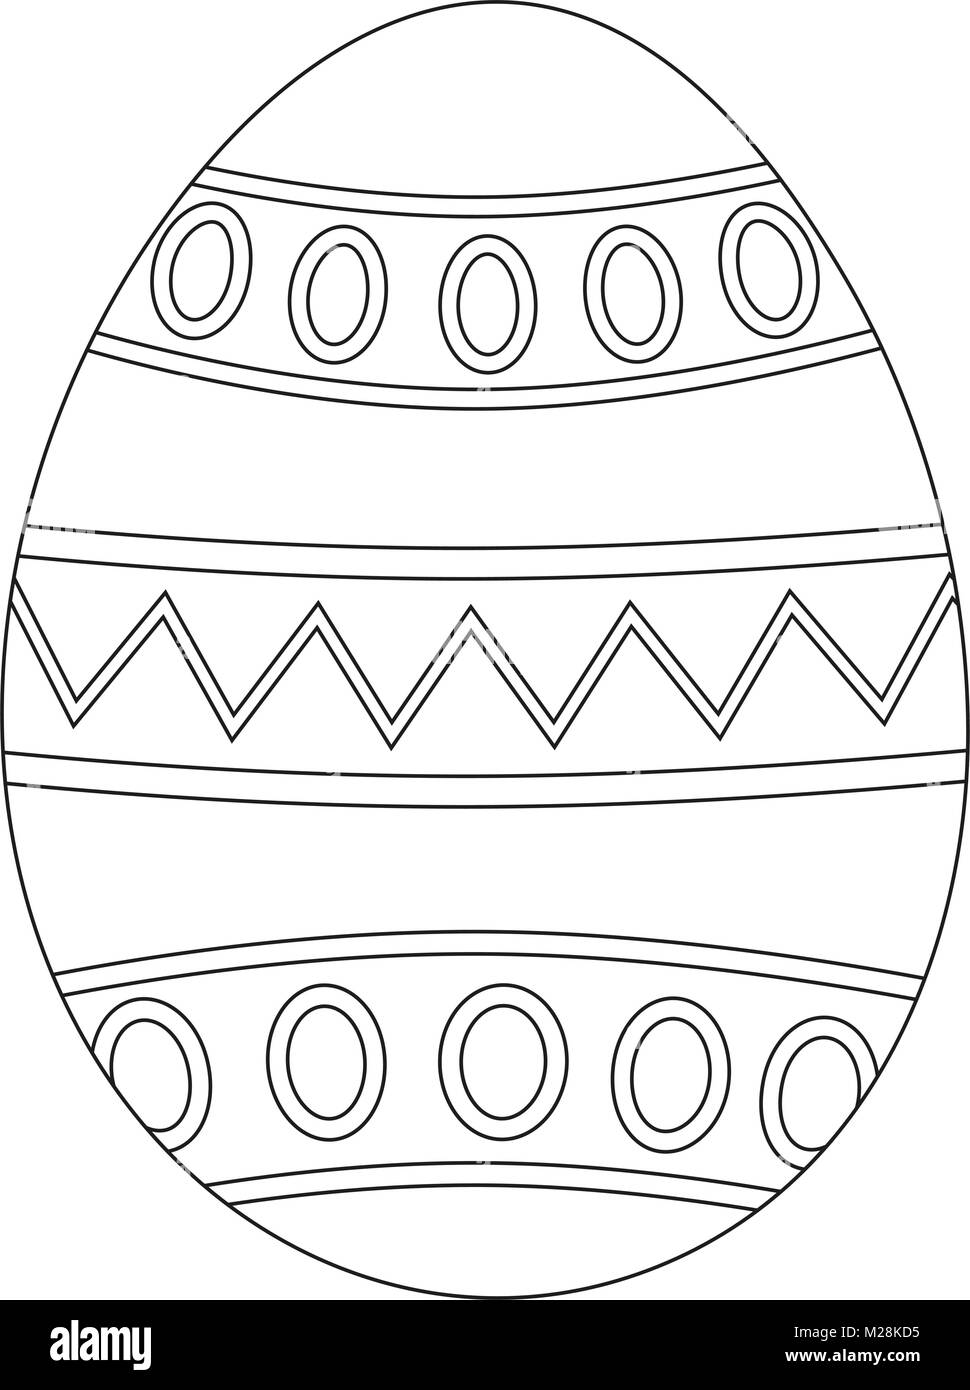 Black and white easter egg poster. Coloring book page for adults ...